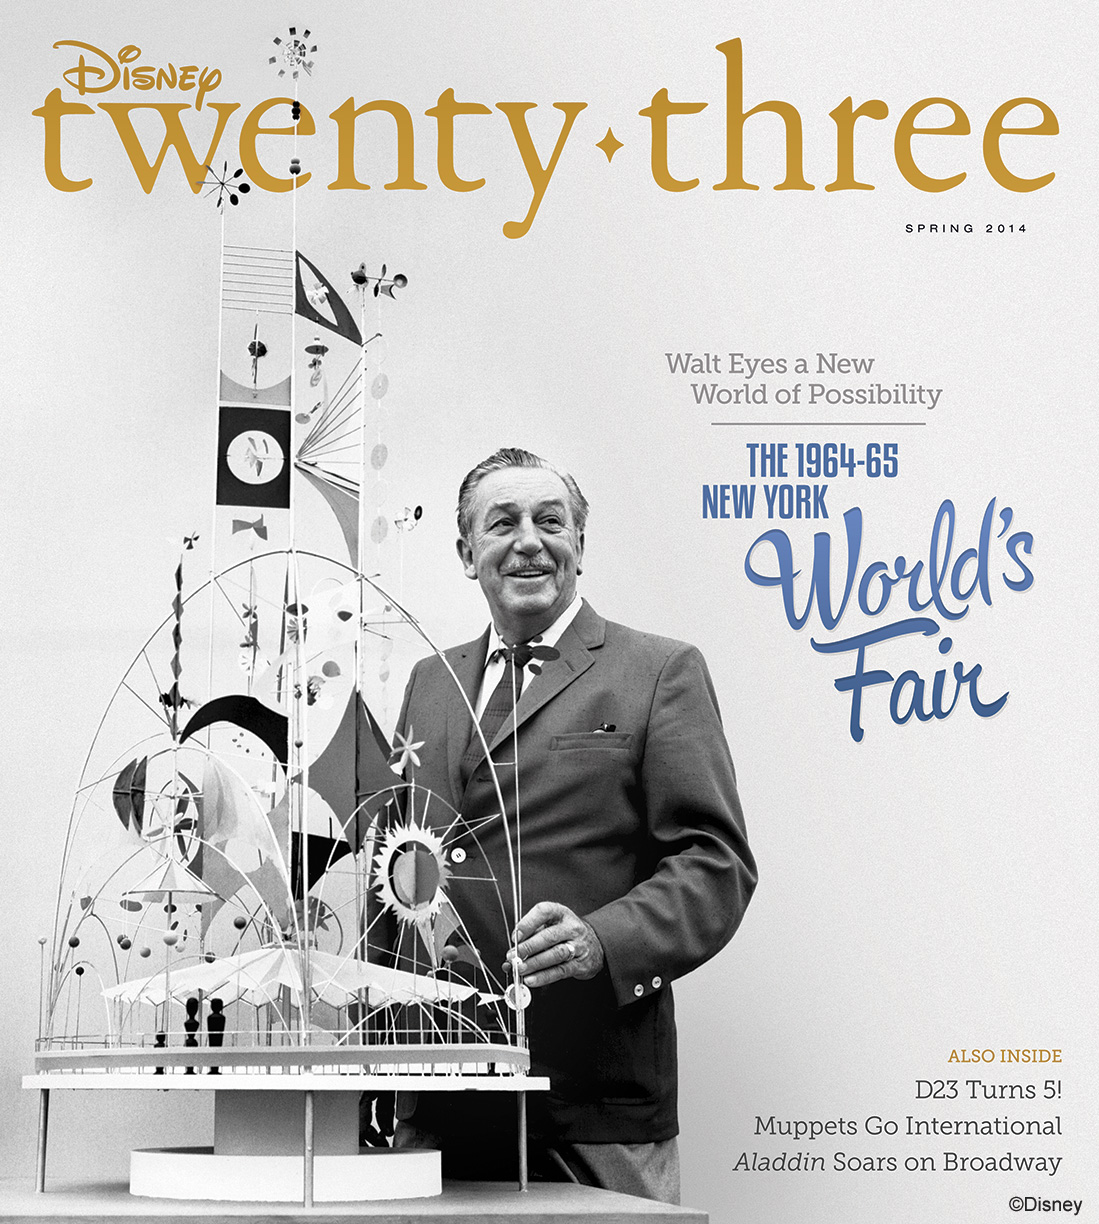 D23 Celebrates Disney’s Contributions to The World’s Fair in the Spring 2014 Issue